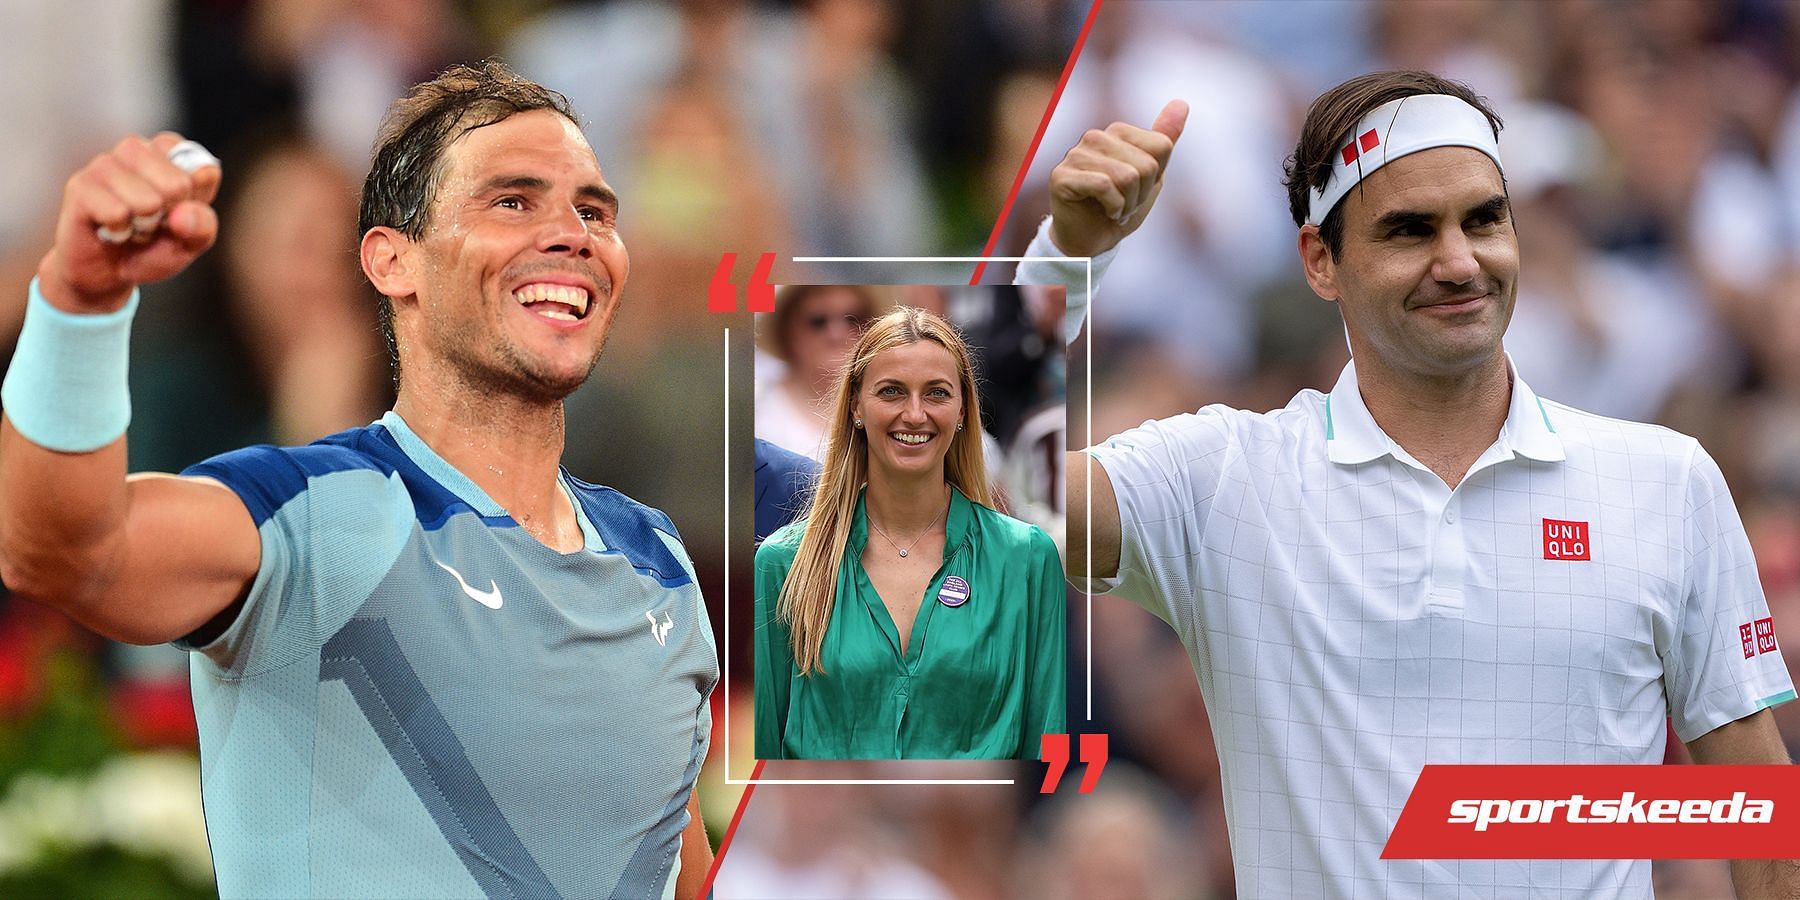 Nadal and Federer are among the players whose qualities make up Petra Kvitova&#039;s perfect player.